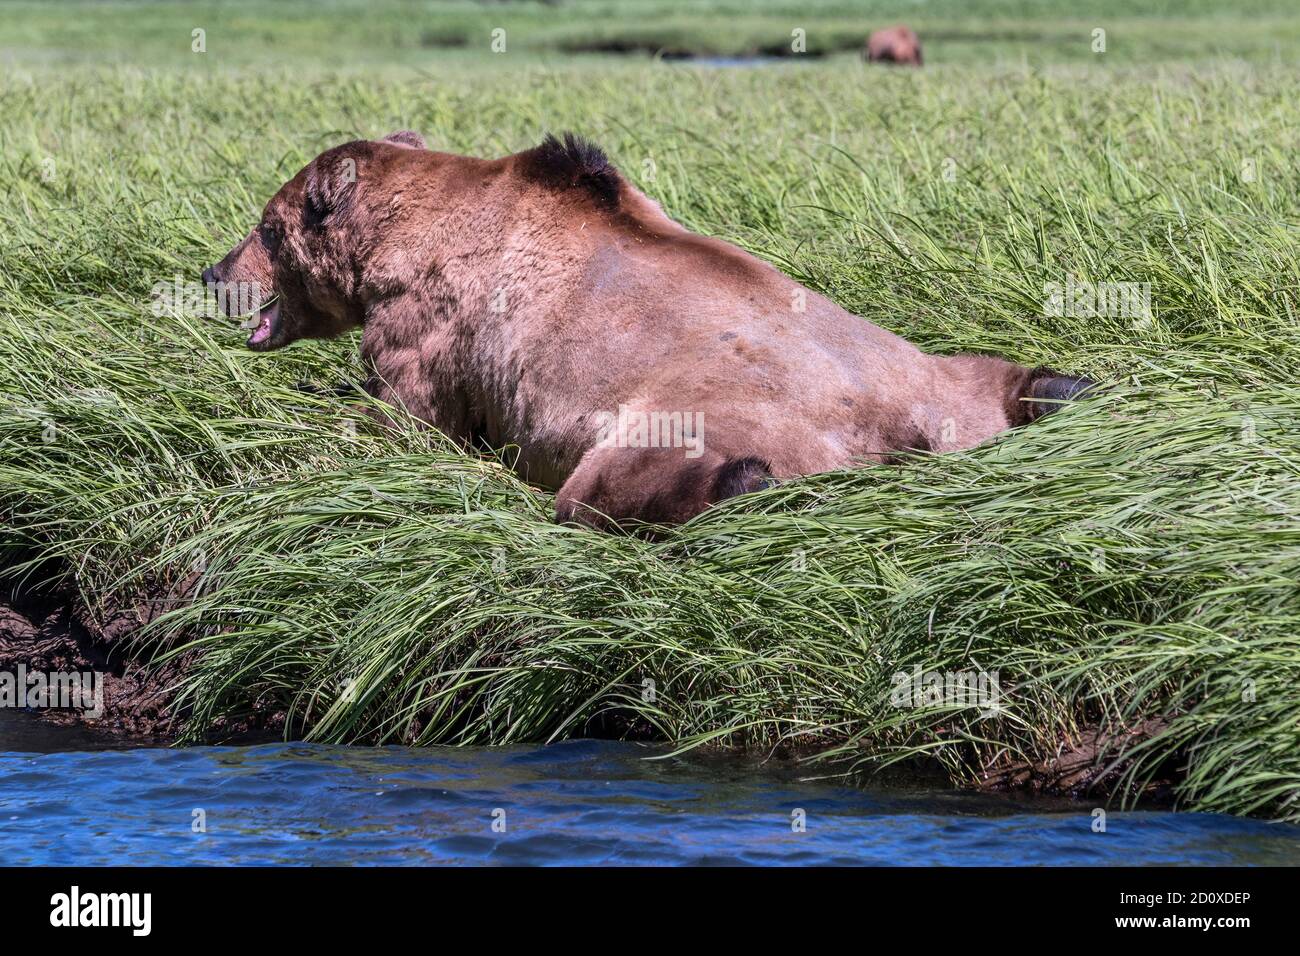 Battle-scarred old grizzly resting in the sedge grass, Khutzeymateen Inlet, BC Stock Photo